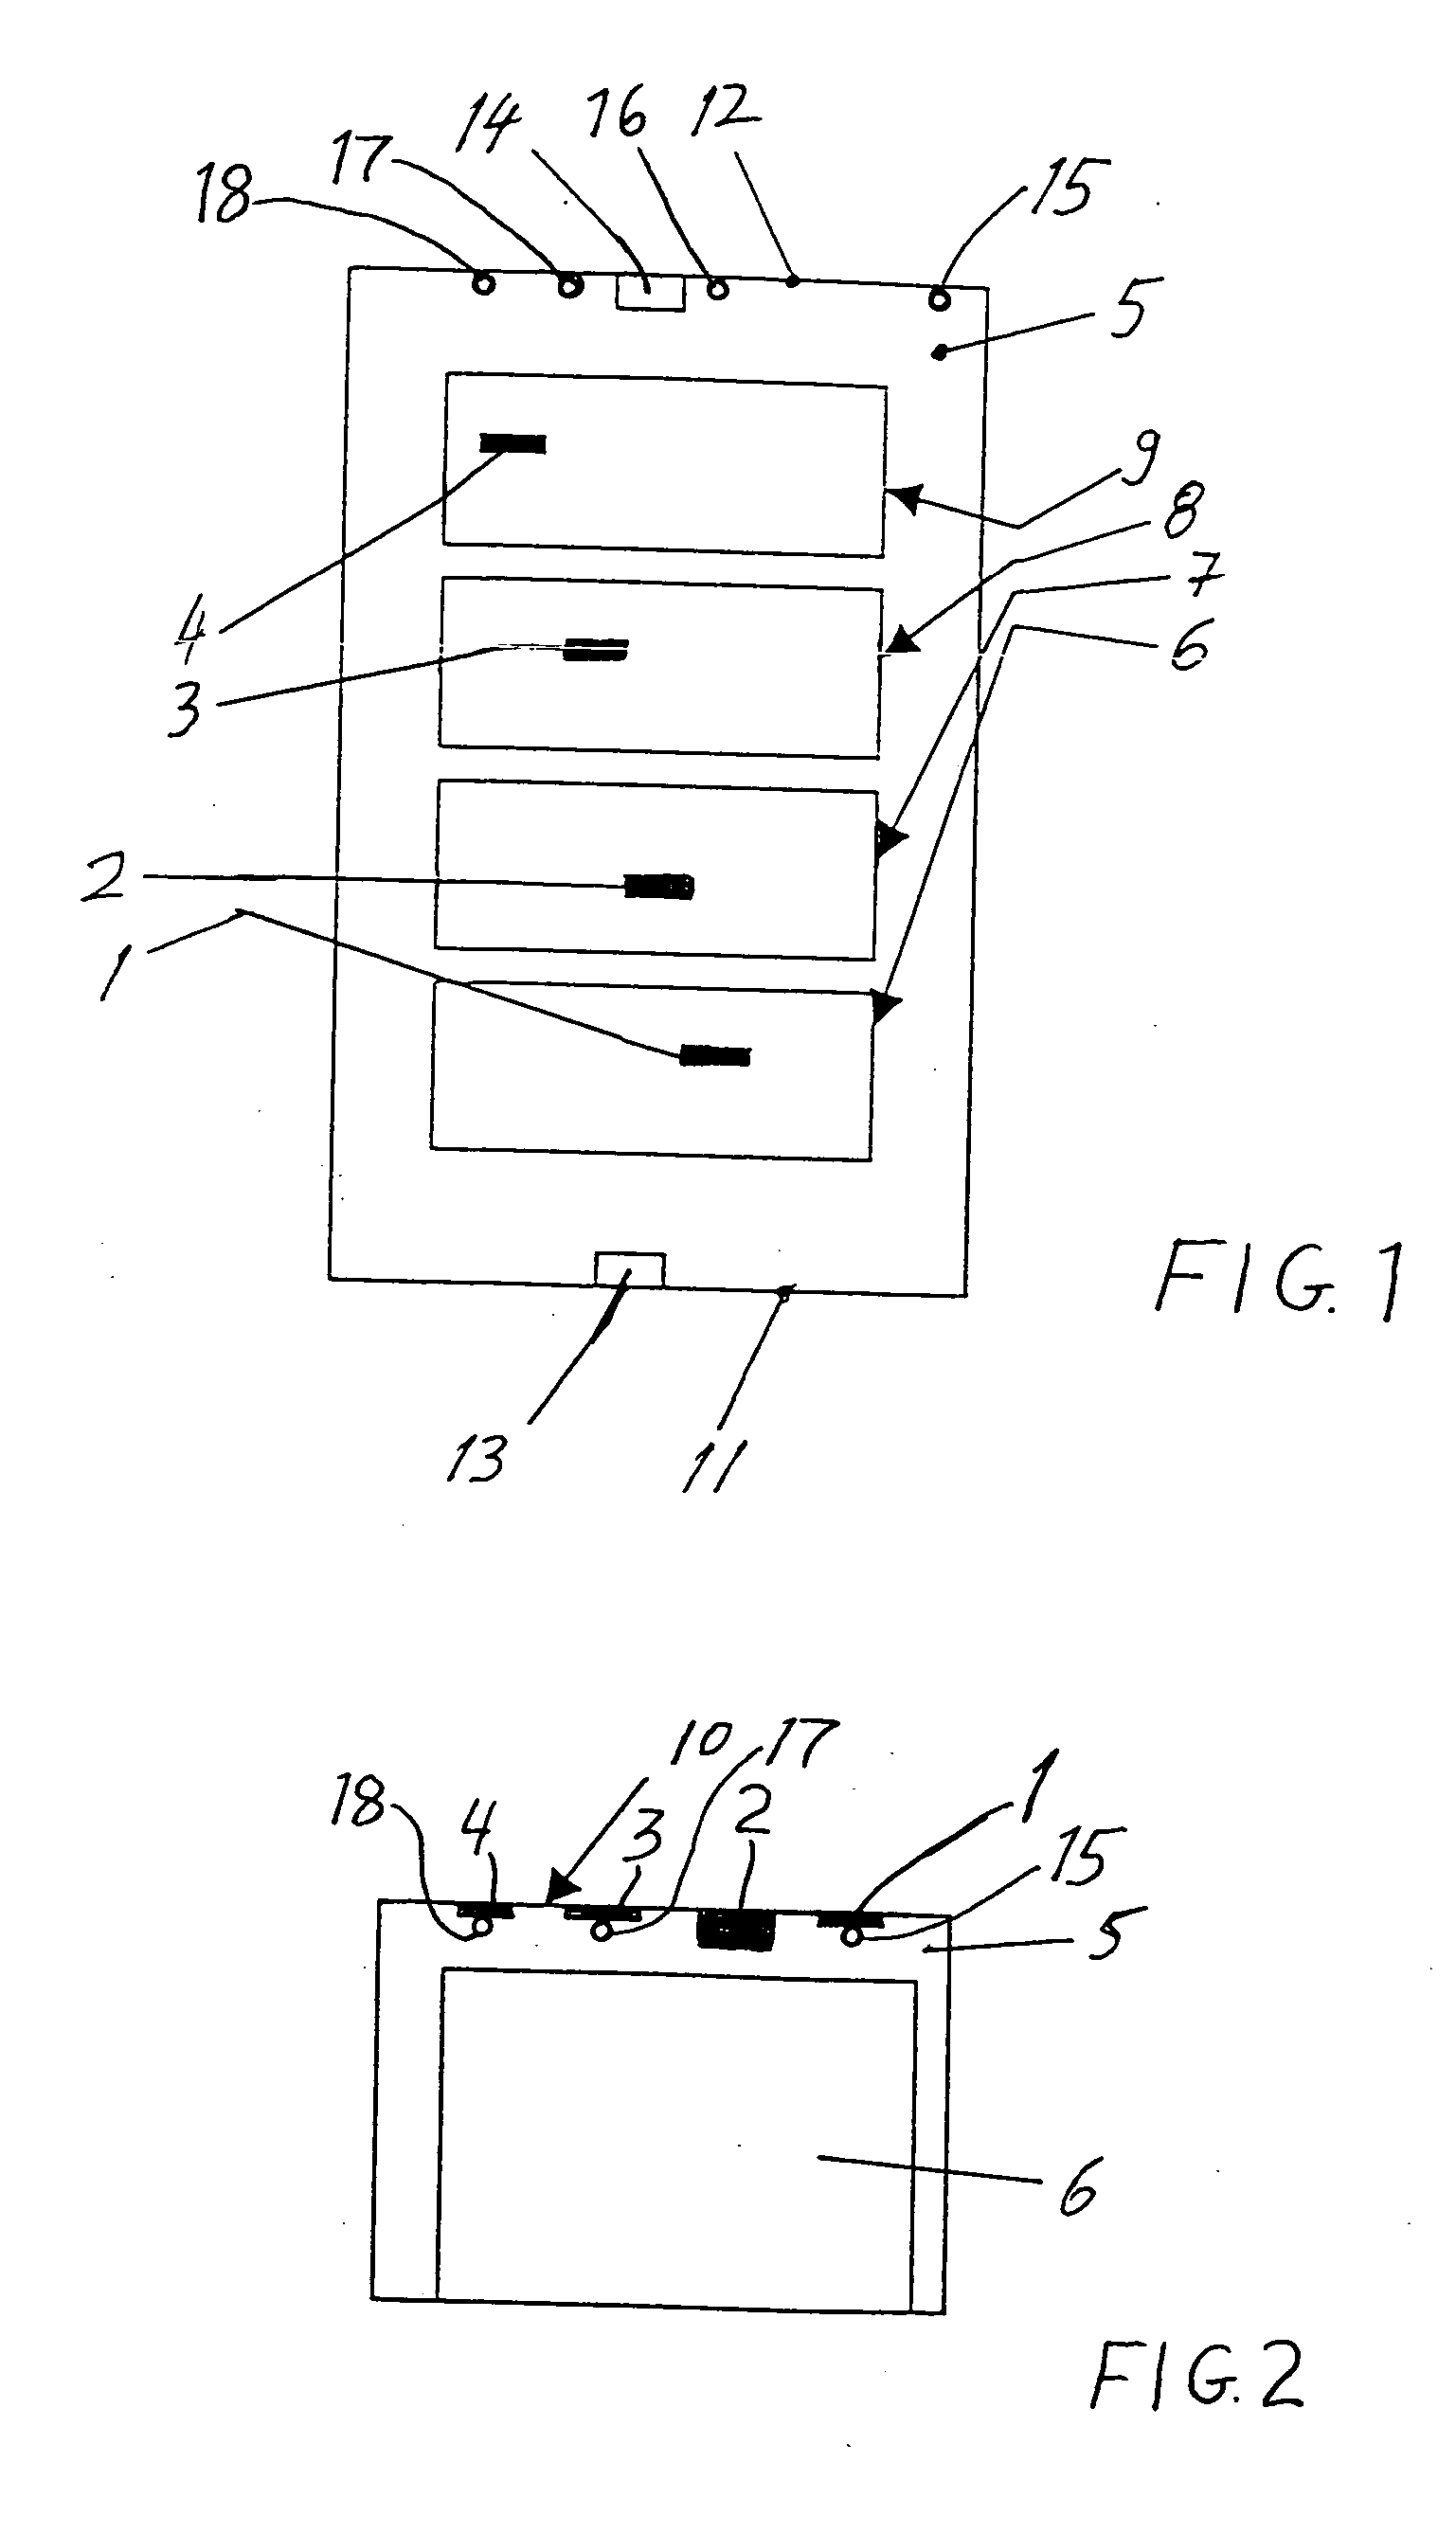 Method and apparatus for optically detecting and locating a fire in an enclosed space